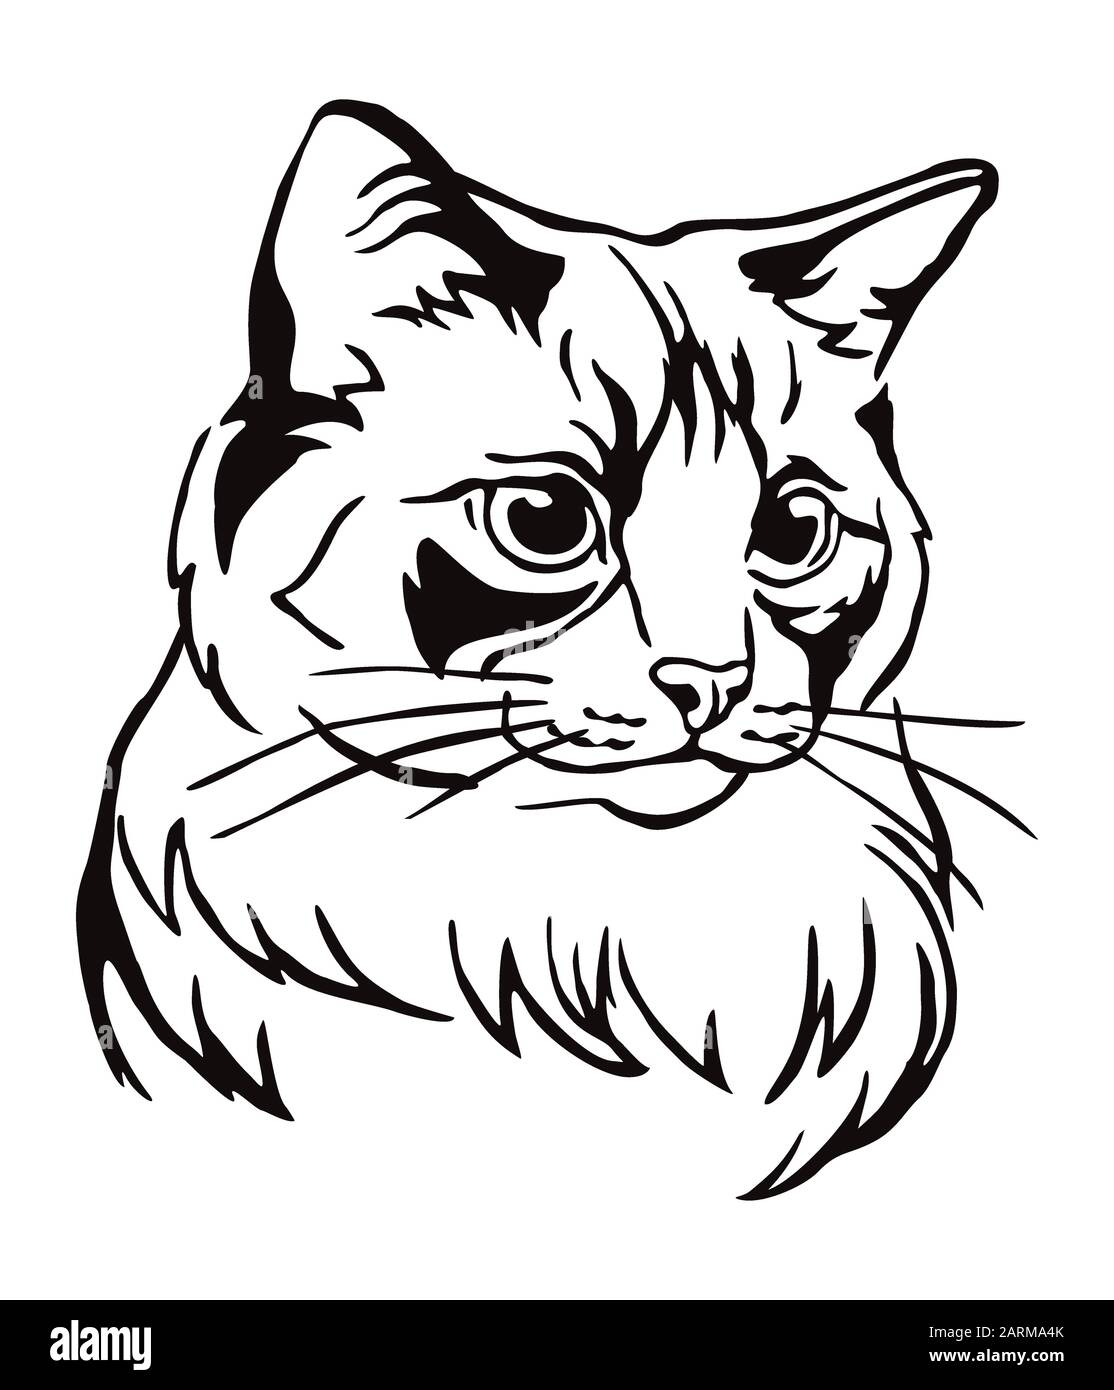 Decorative portrait of Ragdoll cat, contour vector illustration in black color isolated on white background. Image for design, cards and tattoo. Stock Vector